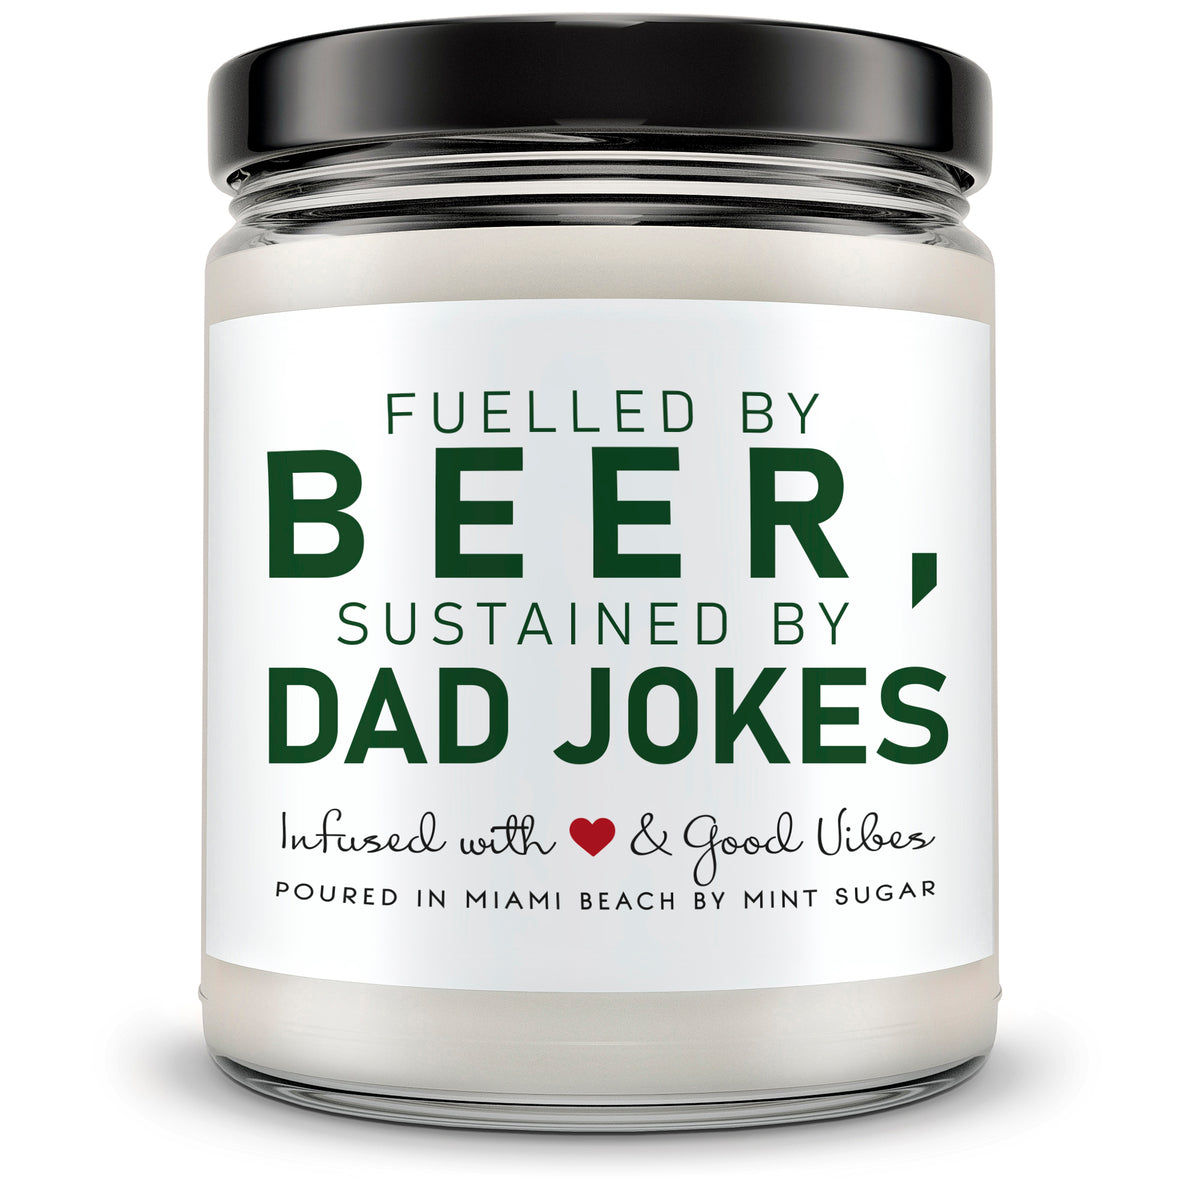 Fueled by Beer, Sustained by Dad Jokes - Mint Sugar Candle